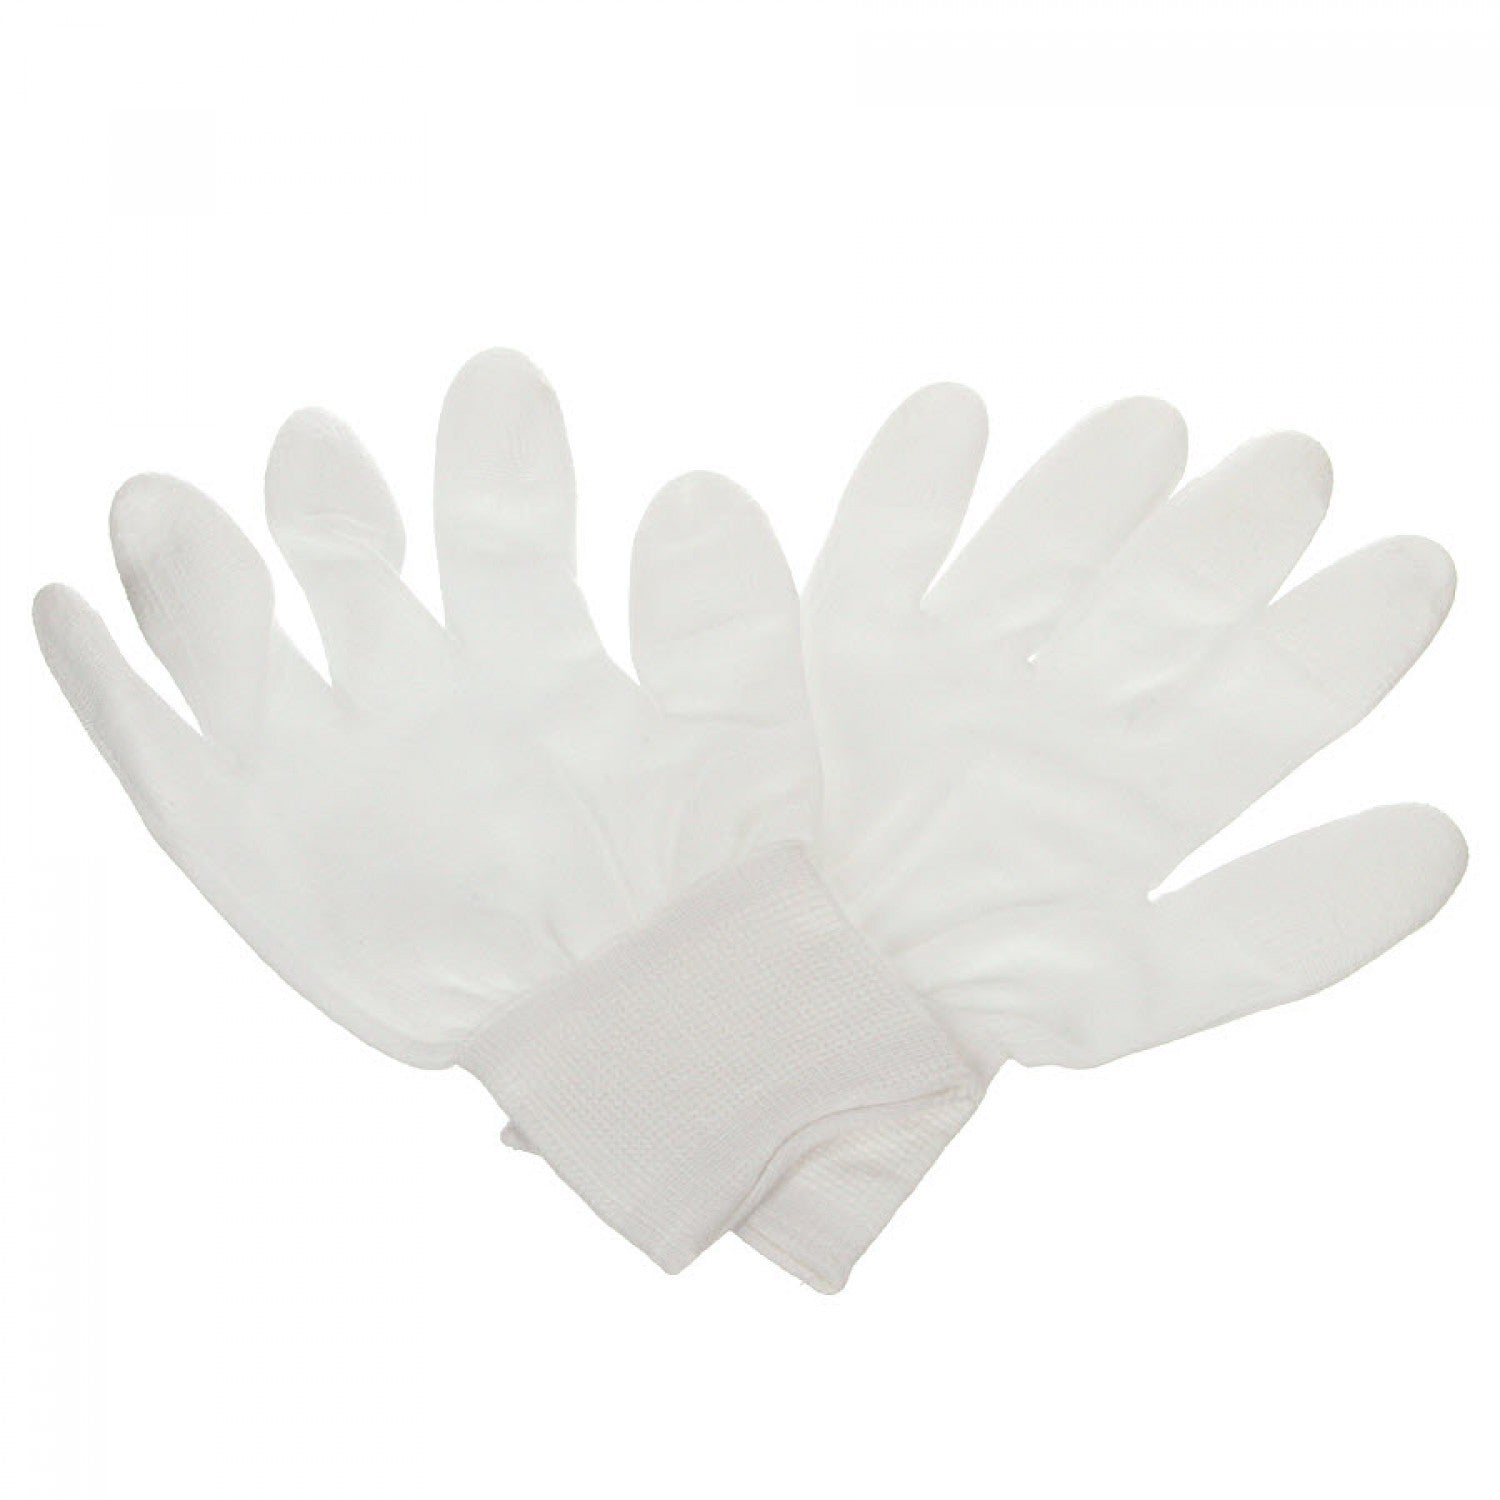 Machingers Quilting Gloves - Extra Large